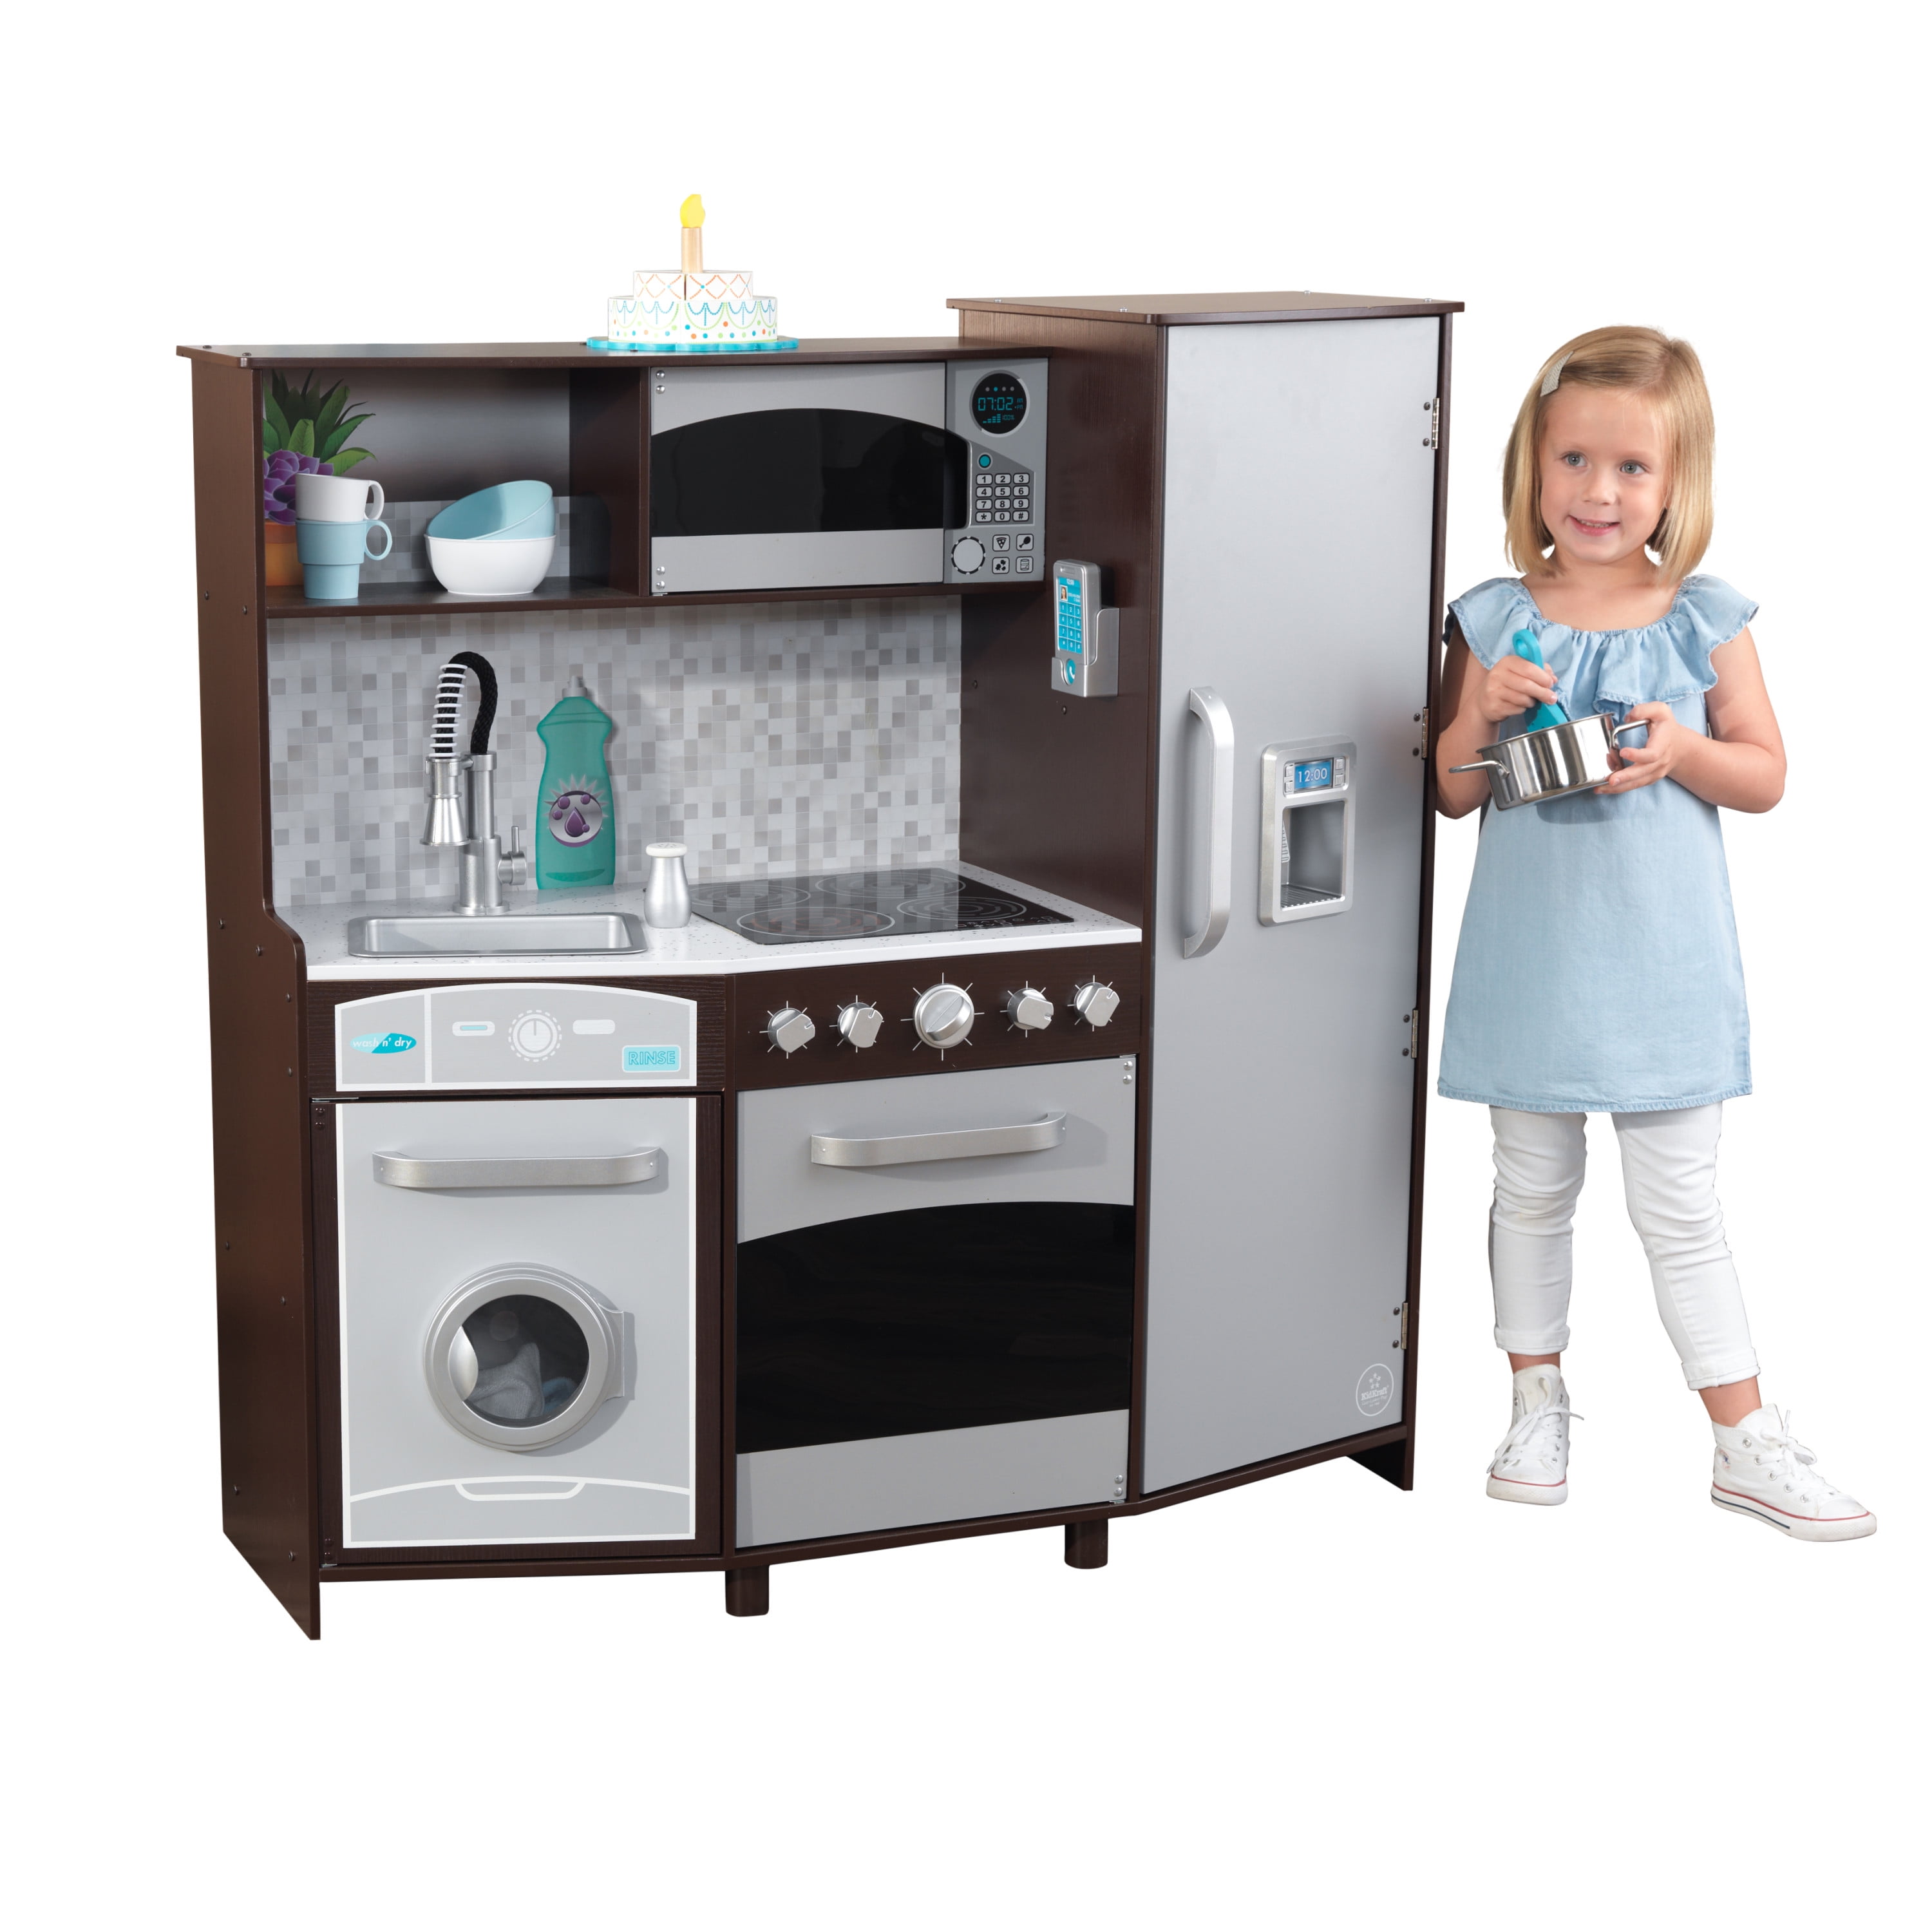 Details about   Kitchen Toy Kitchen with Sounds Lights Real Water Function and accessories incl show original title 